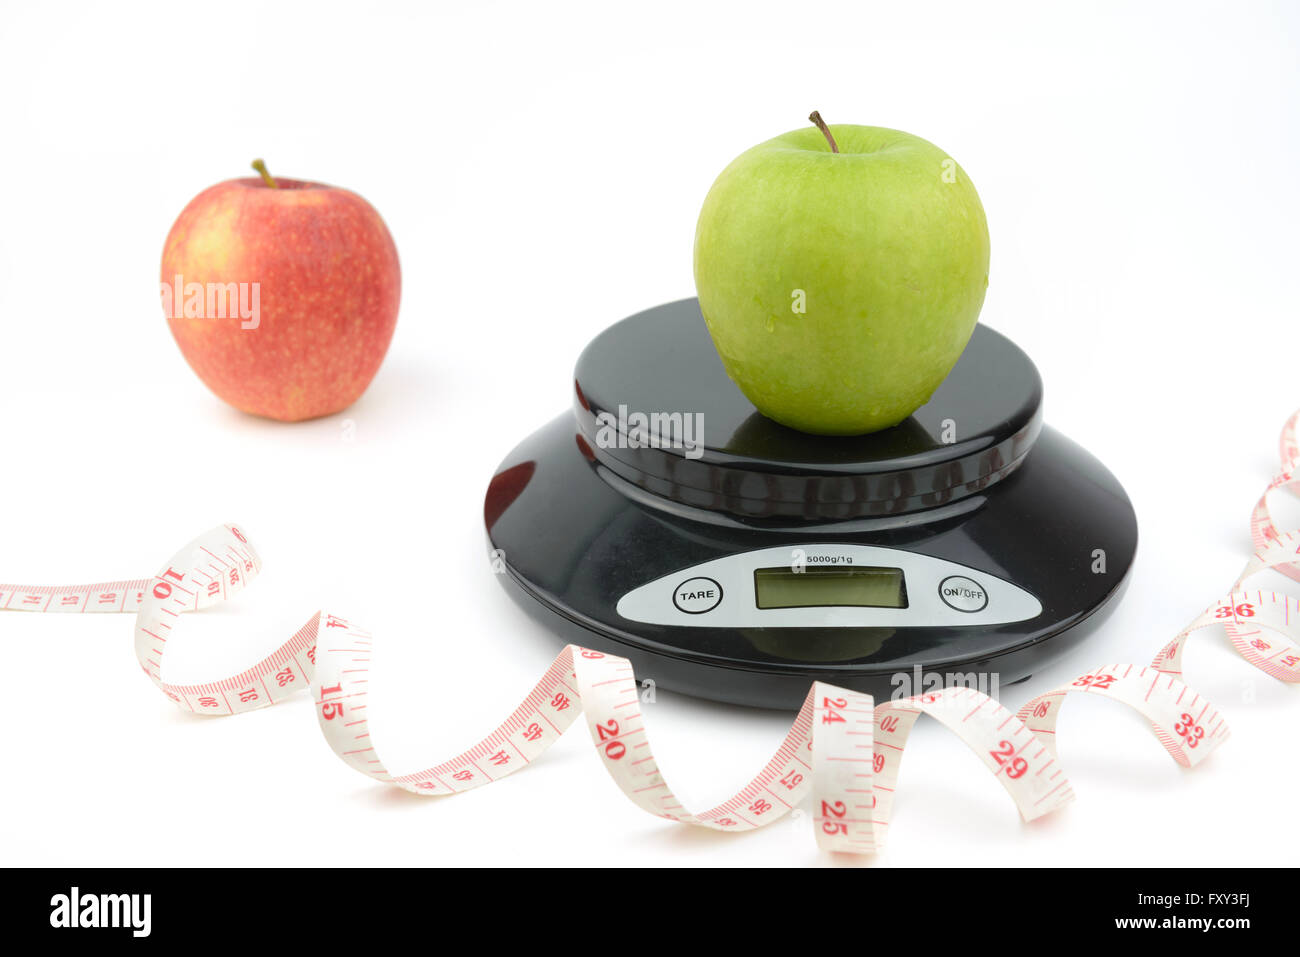 Black digital scale on isolate white background, with green apple, measurement tape Stock Photo